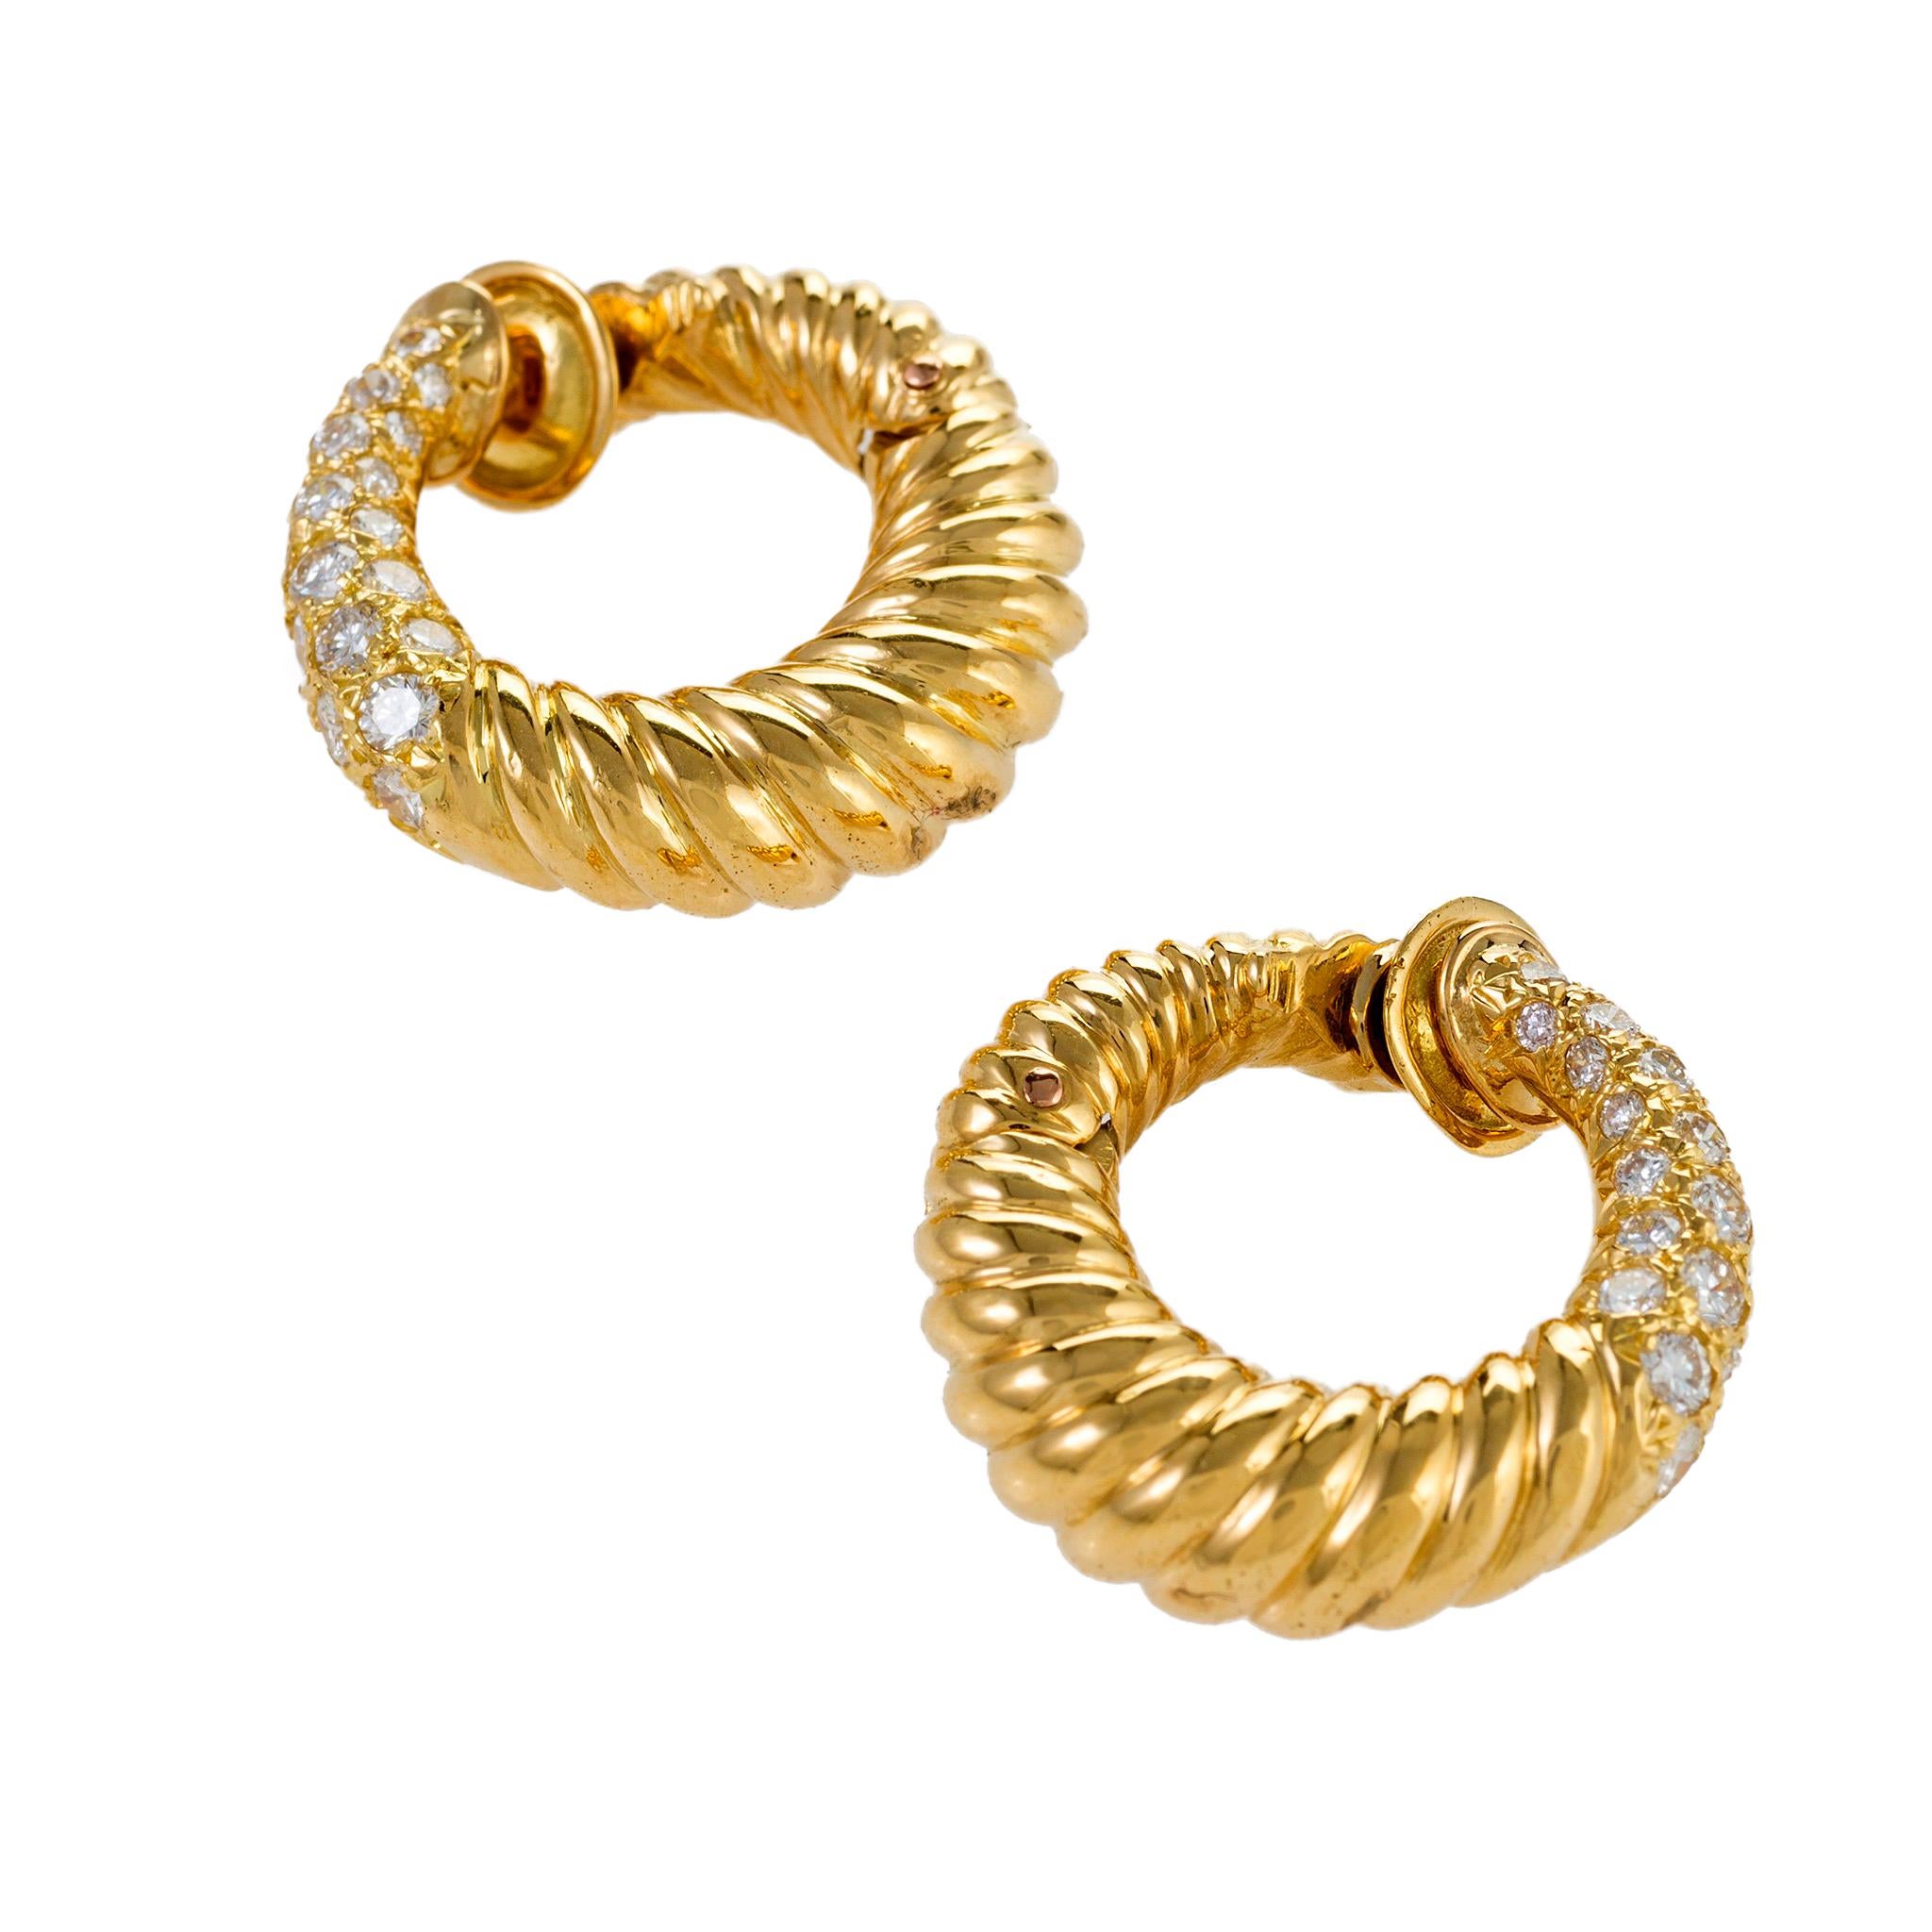 These gold and diamond hoop earrings by Van Cleef & Arpels Paris present an ever-popular form with a sparkling twist. A smaller, lighter version of the classic earring design, these beautifully-modeled and stylish twisted hoops clip and angle close